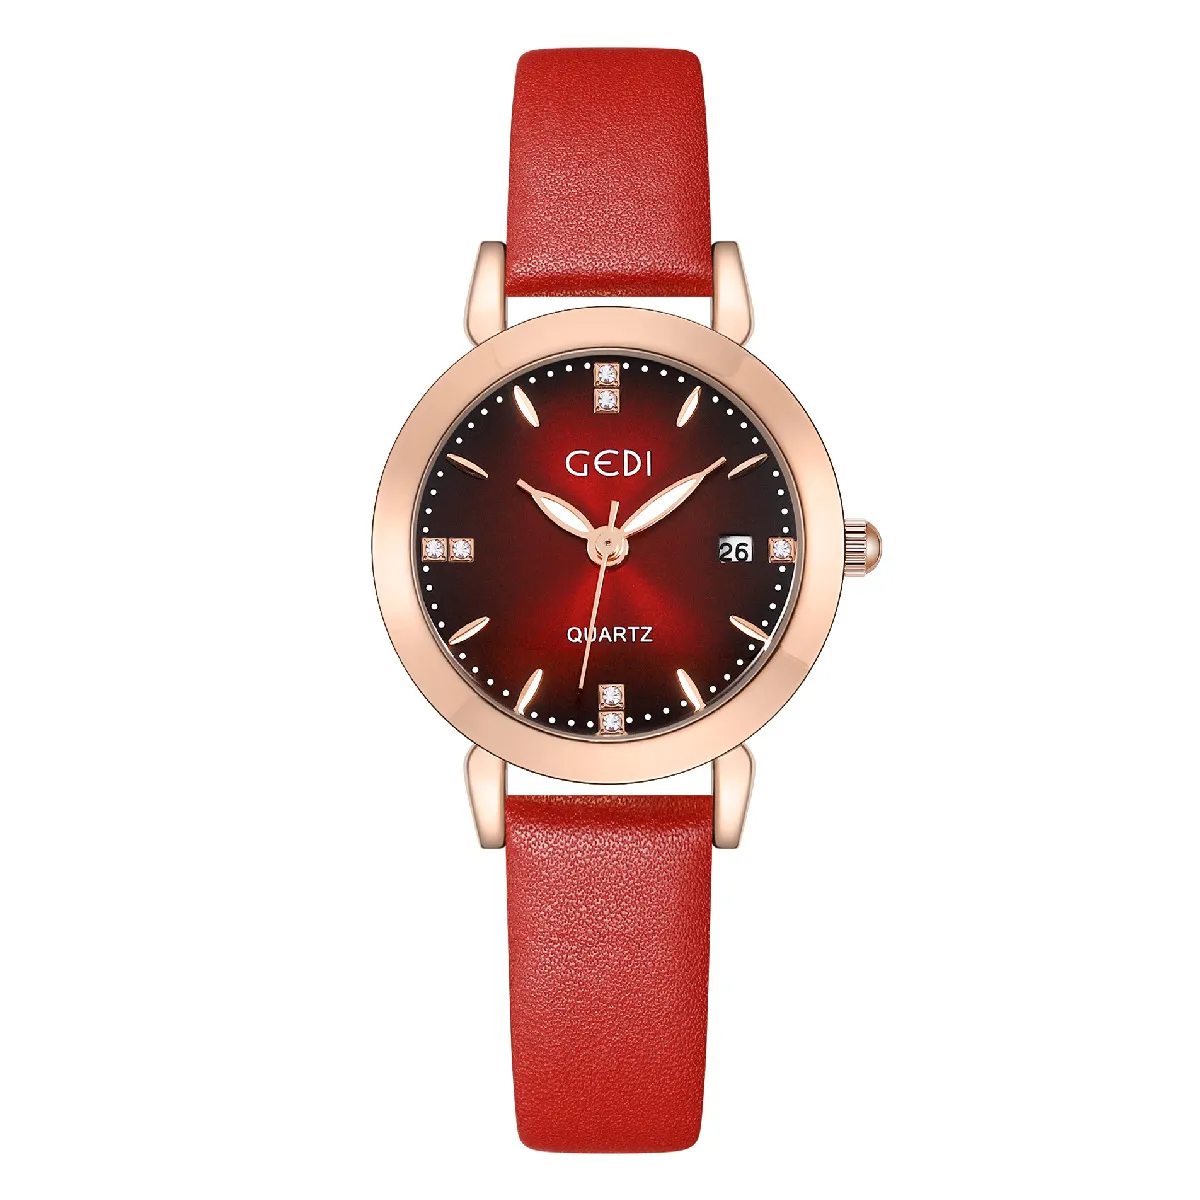 Womens Watch Watches High Quality Luxury Quartz-Battery Casual Waterproof Leather 29mm Watch